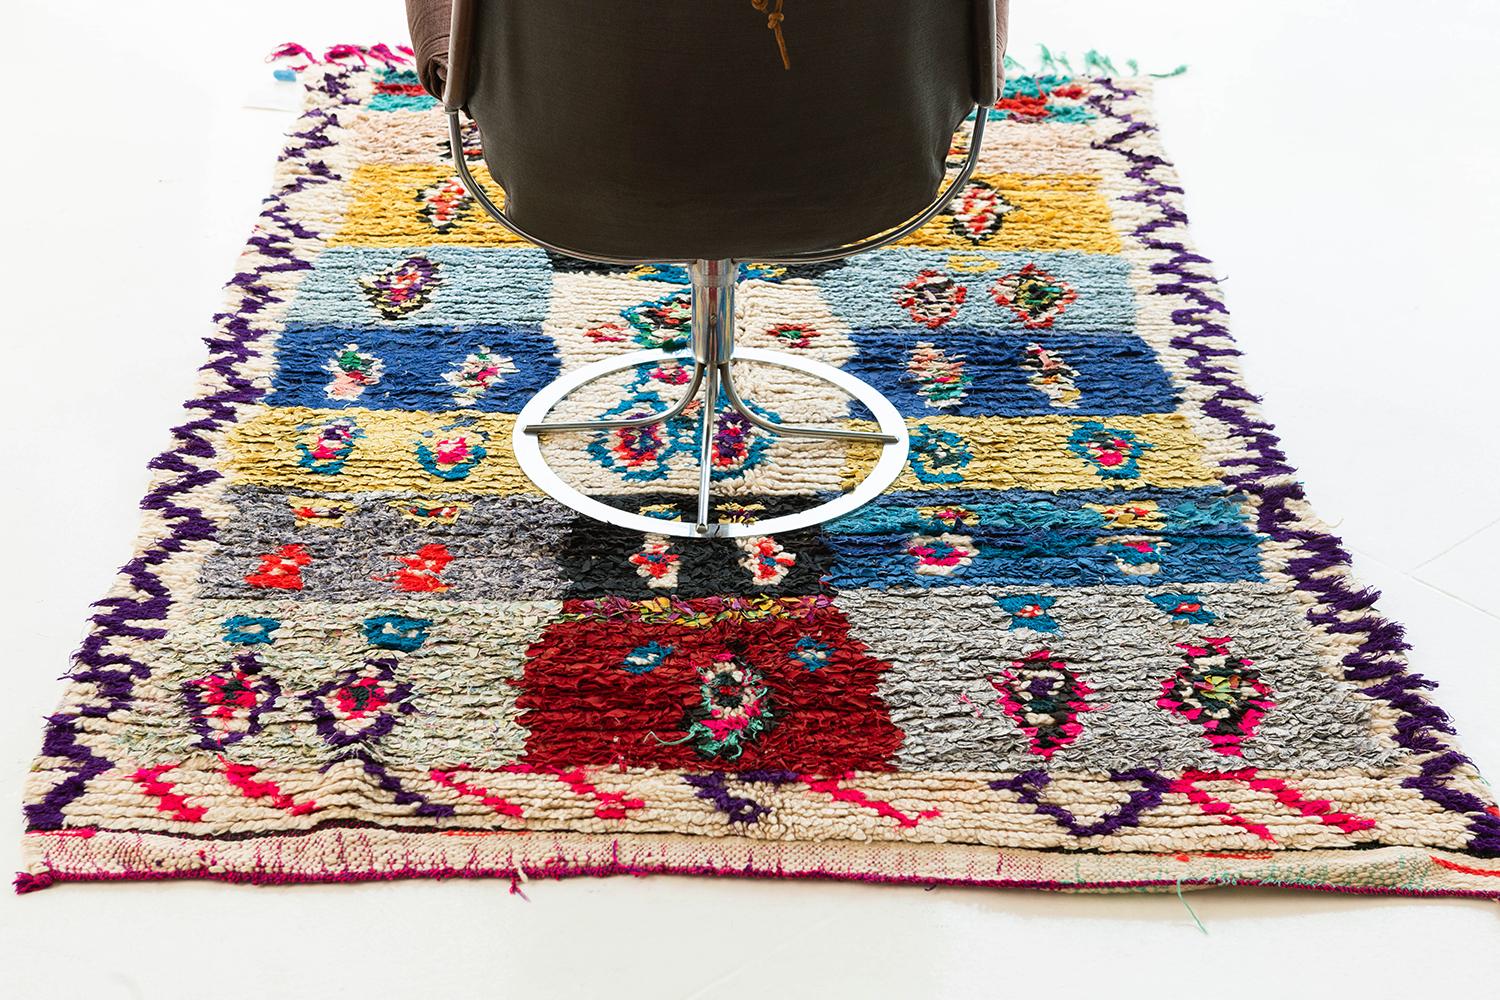 Playfully vivid ribbon-rug of rectangular compartments with interior medallion elements, and zigzag borders. Primary colors include ivory, yellow, blue, black, red and pink. Materials include recycled textiles and fibers-- a traditional practice